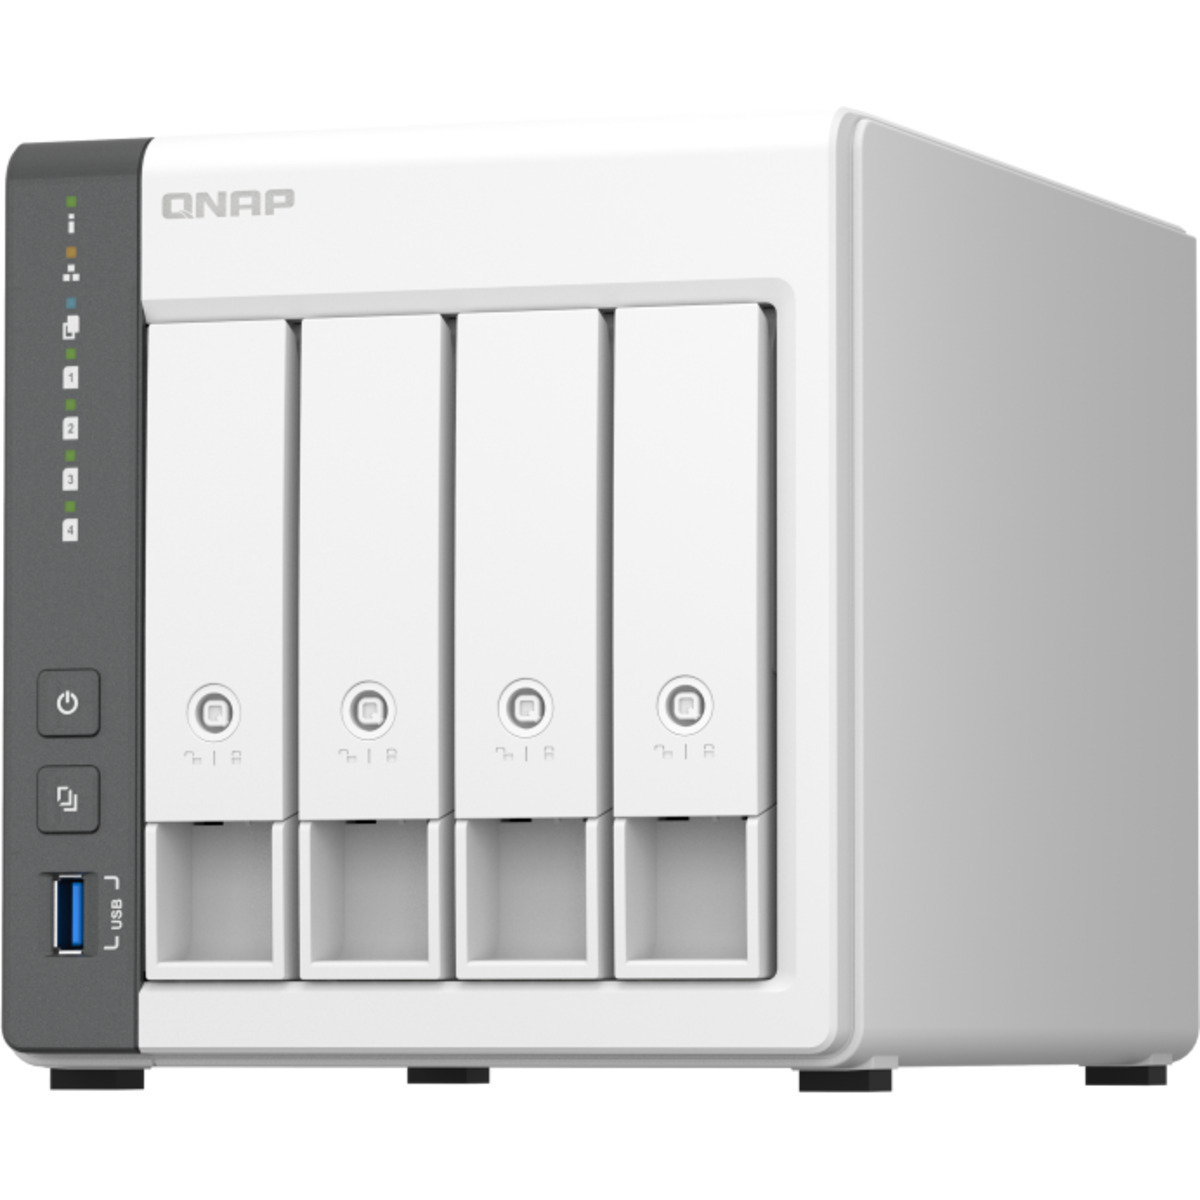 buy $2124 QNAP TS-433 80tb Desktop NAS - Network Attached Storage Device 4x20000gb Western Digital Red Pro WD201KFGX 3.5 7200rpm SATA 6Gb/s HDD NAS Class Drives Installed - Burn-In Tested - nas headquarters buy network attached storage server device das new raid-5 free shipping usa TS-433